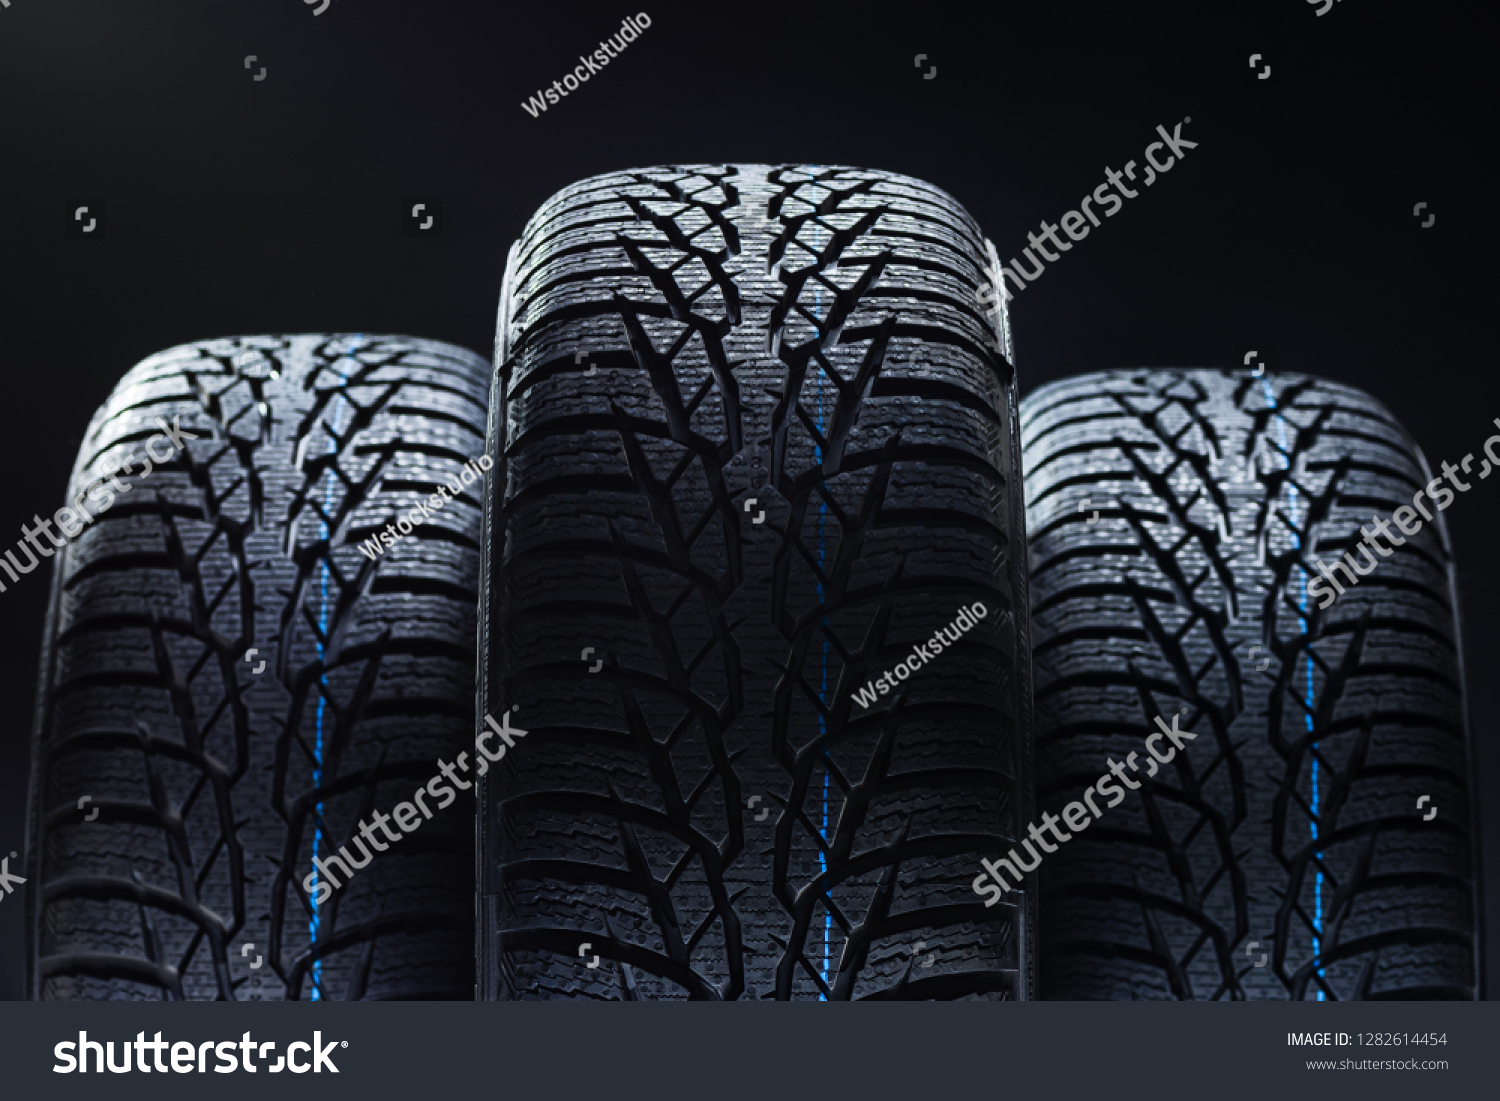 Set of new winter tires on black background with contrasty lighting. Close up product photograph of unused tyres #1282614454